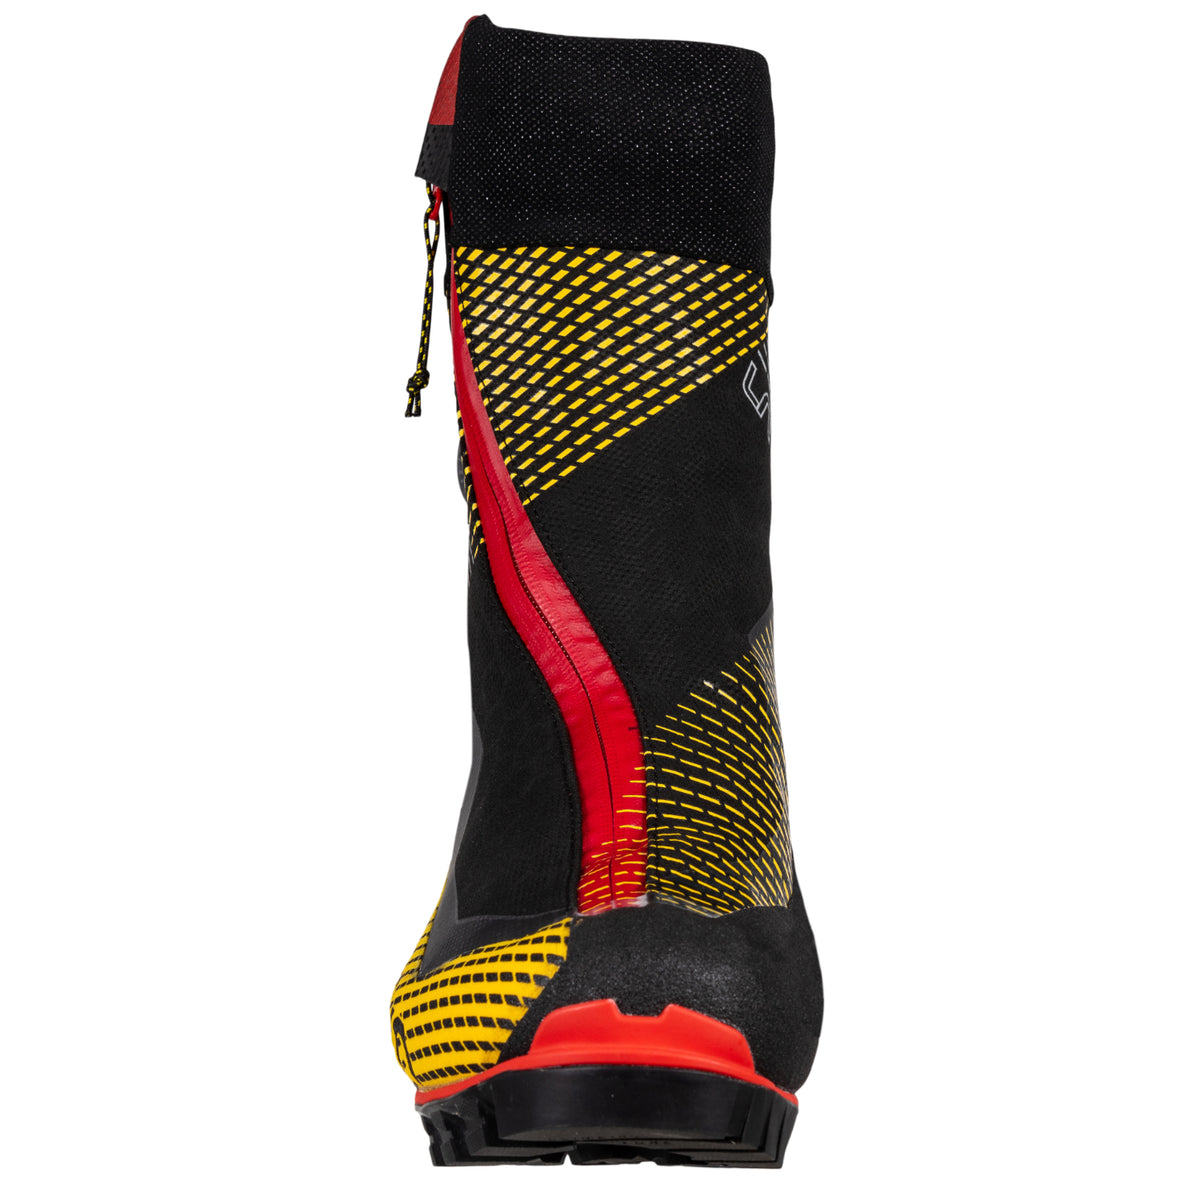 La Sportiva G-Tech mountaineering boots in black red and yellow, showing front toe welt